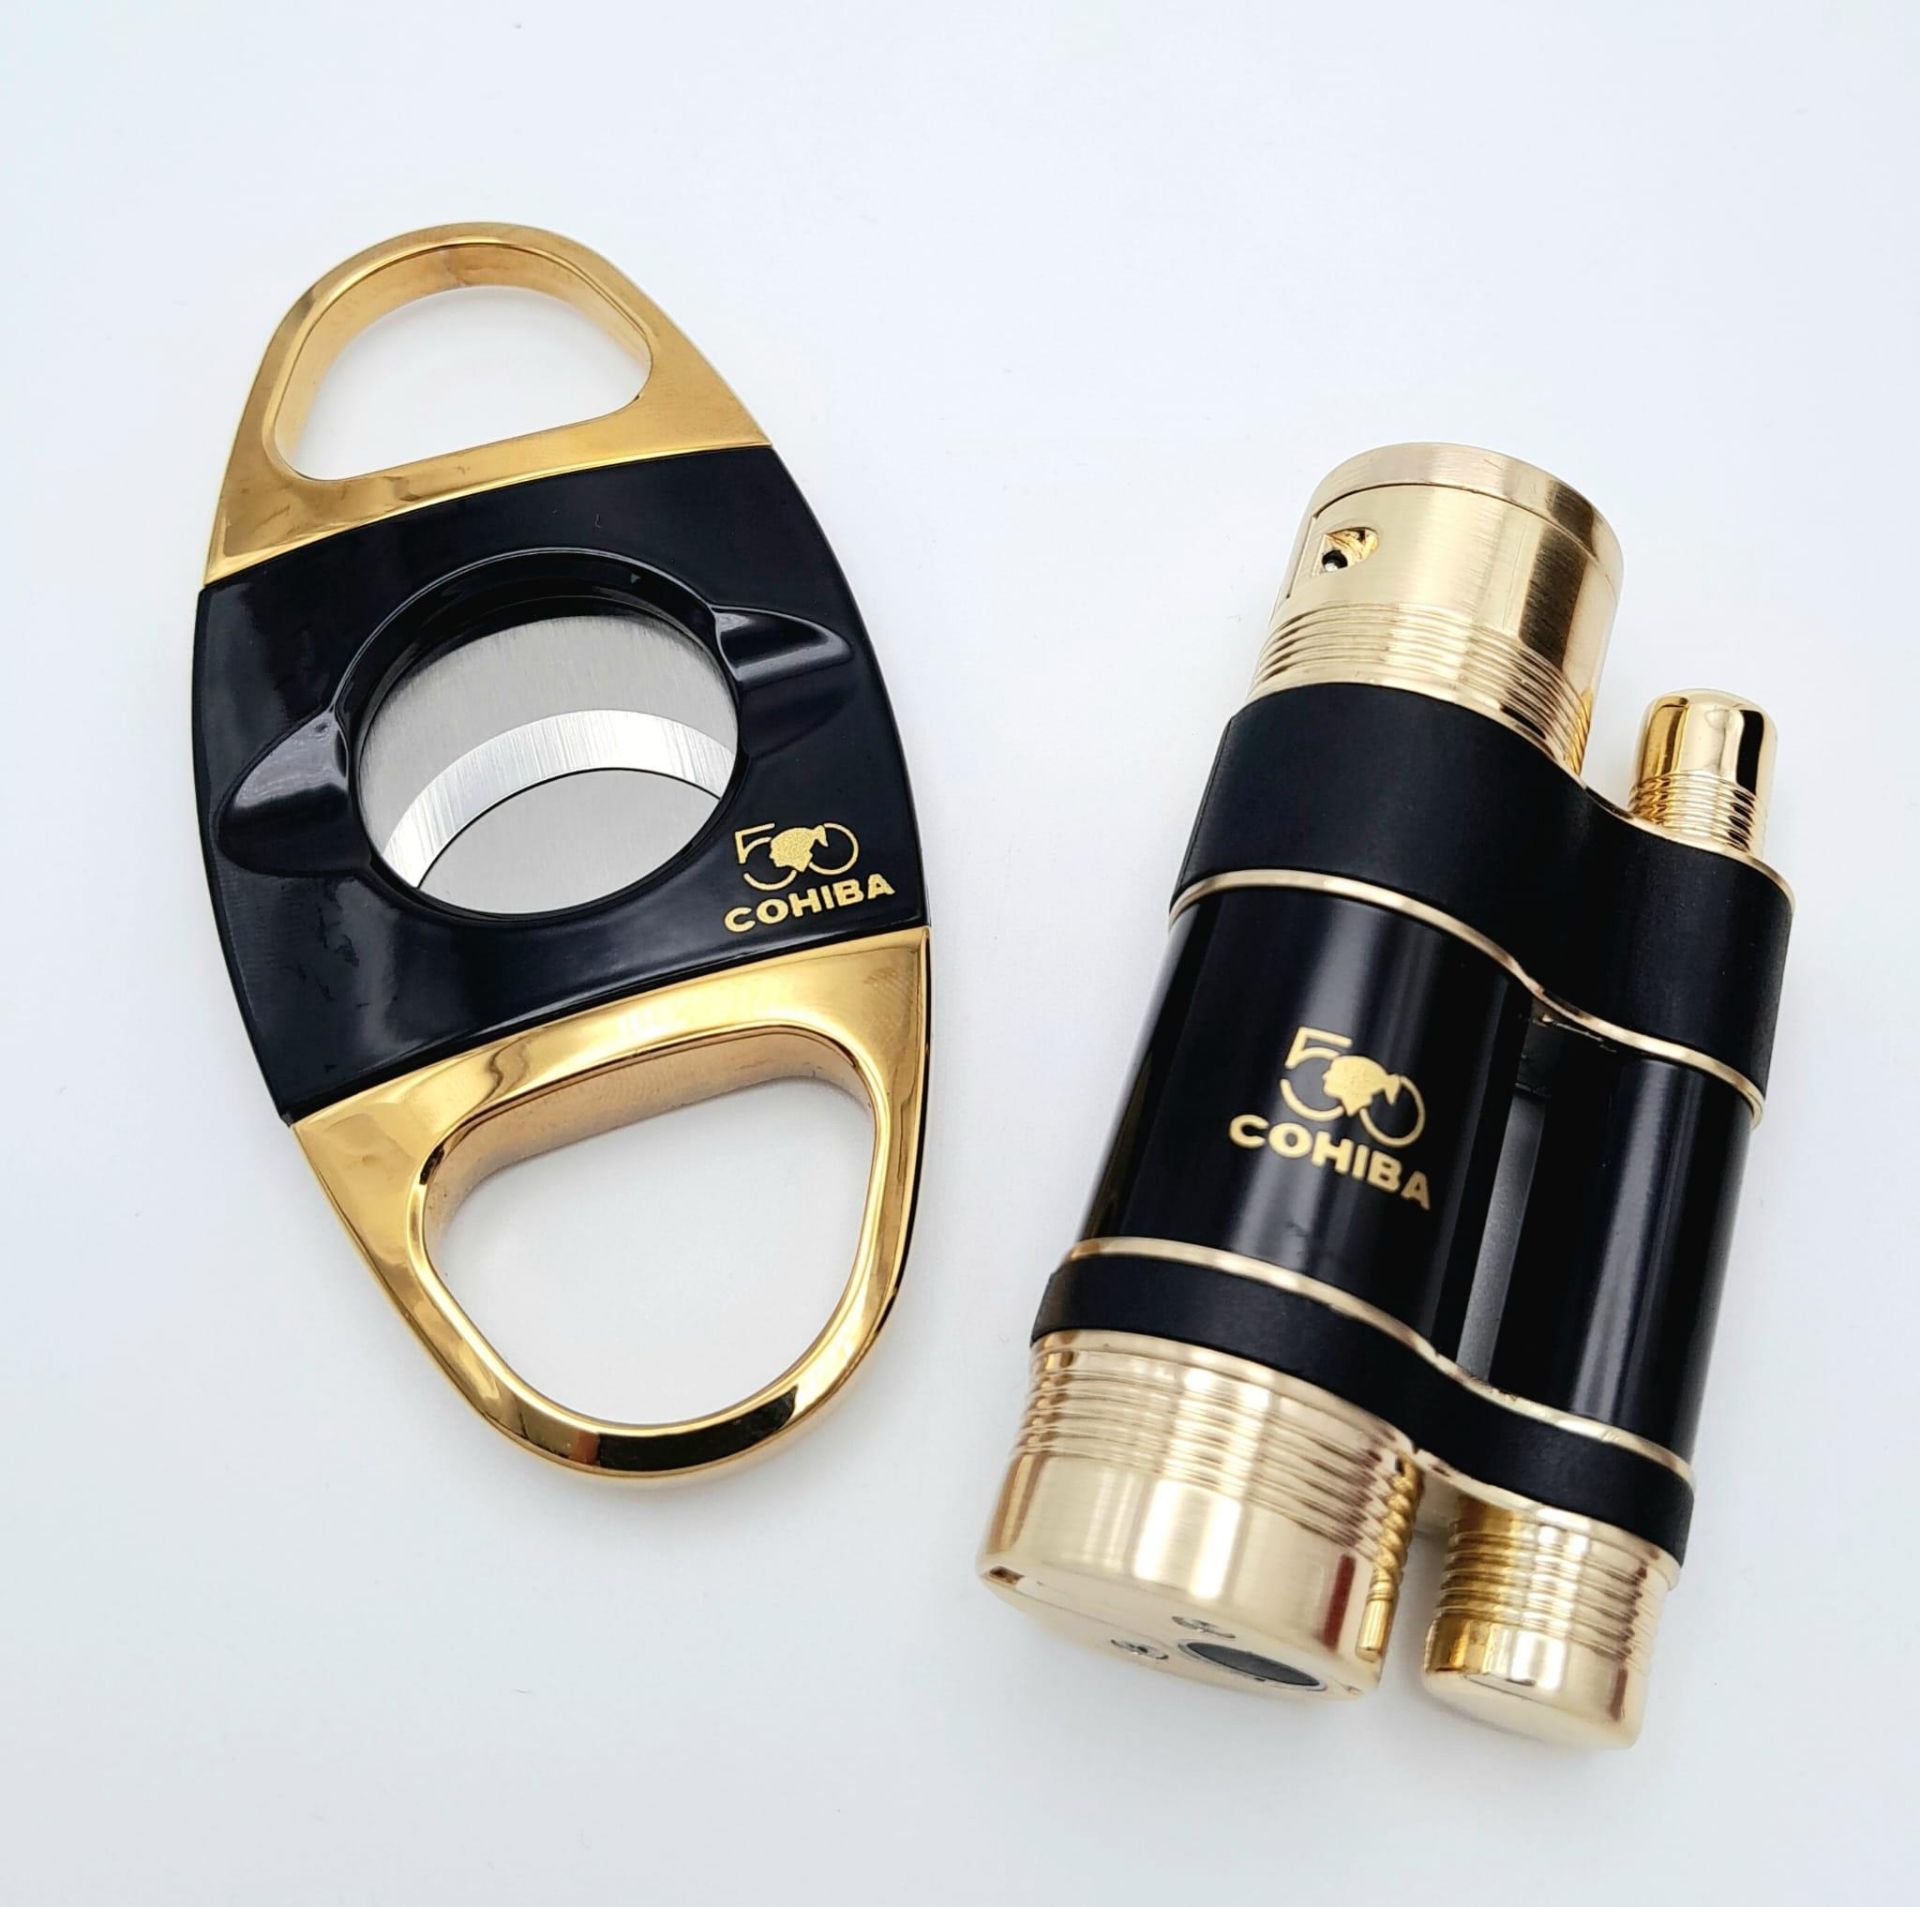 A highly collectable COHIBA lighter and cigar cutter set. This is a commemorative, limited edition - Image 2 of 6